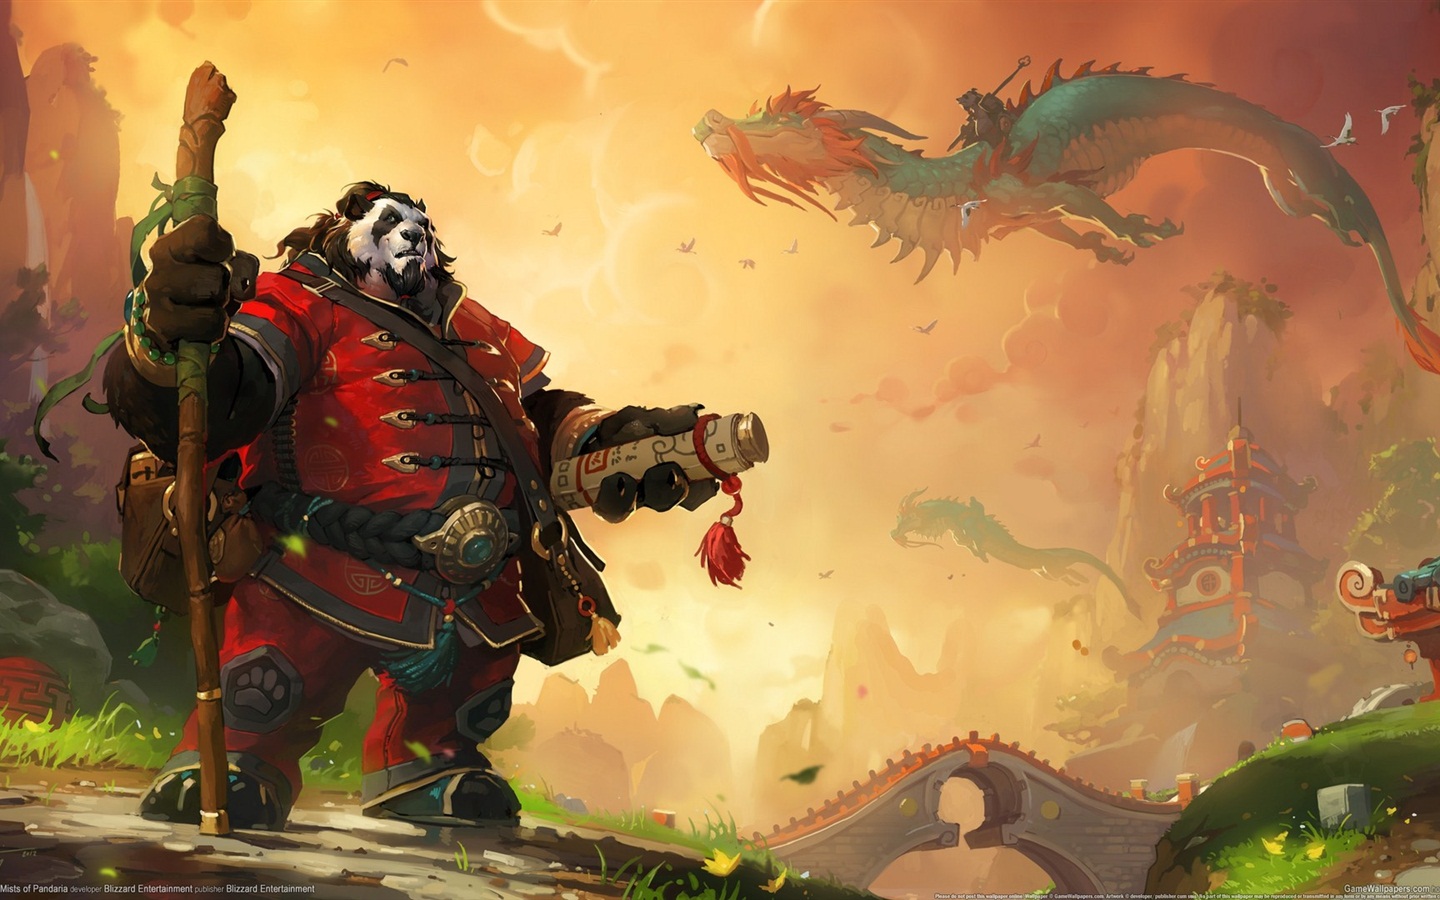 World of Warcraft: Mists of Pandaria HD wallpapers #12 - 1440x900